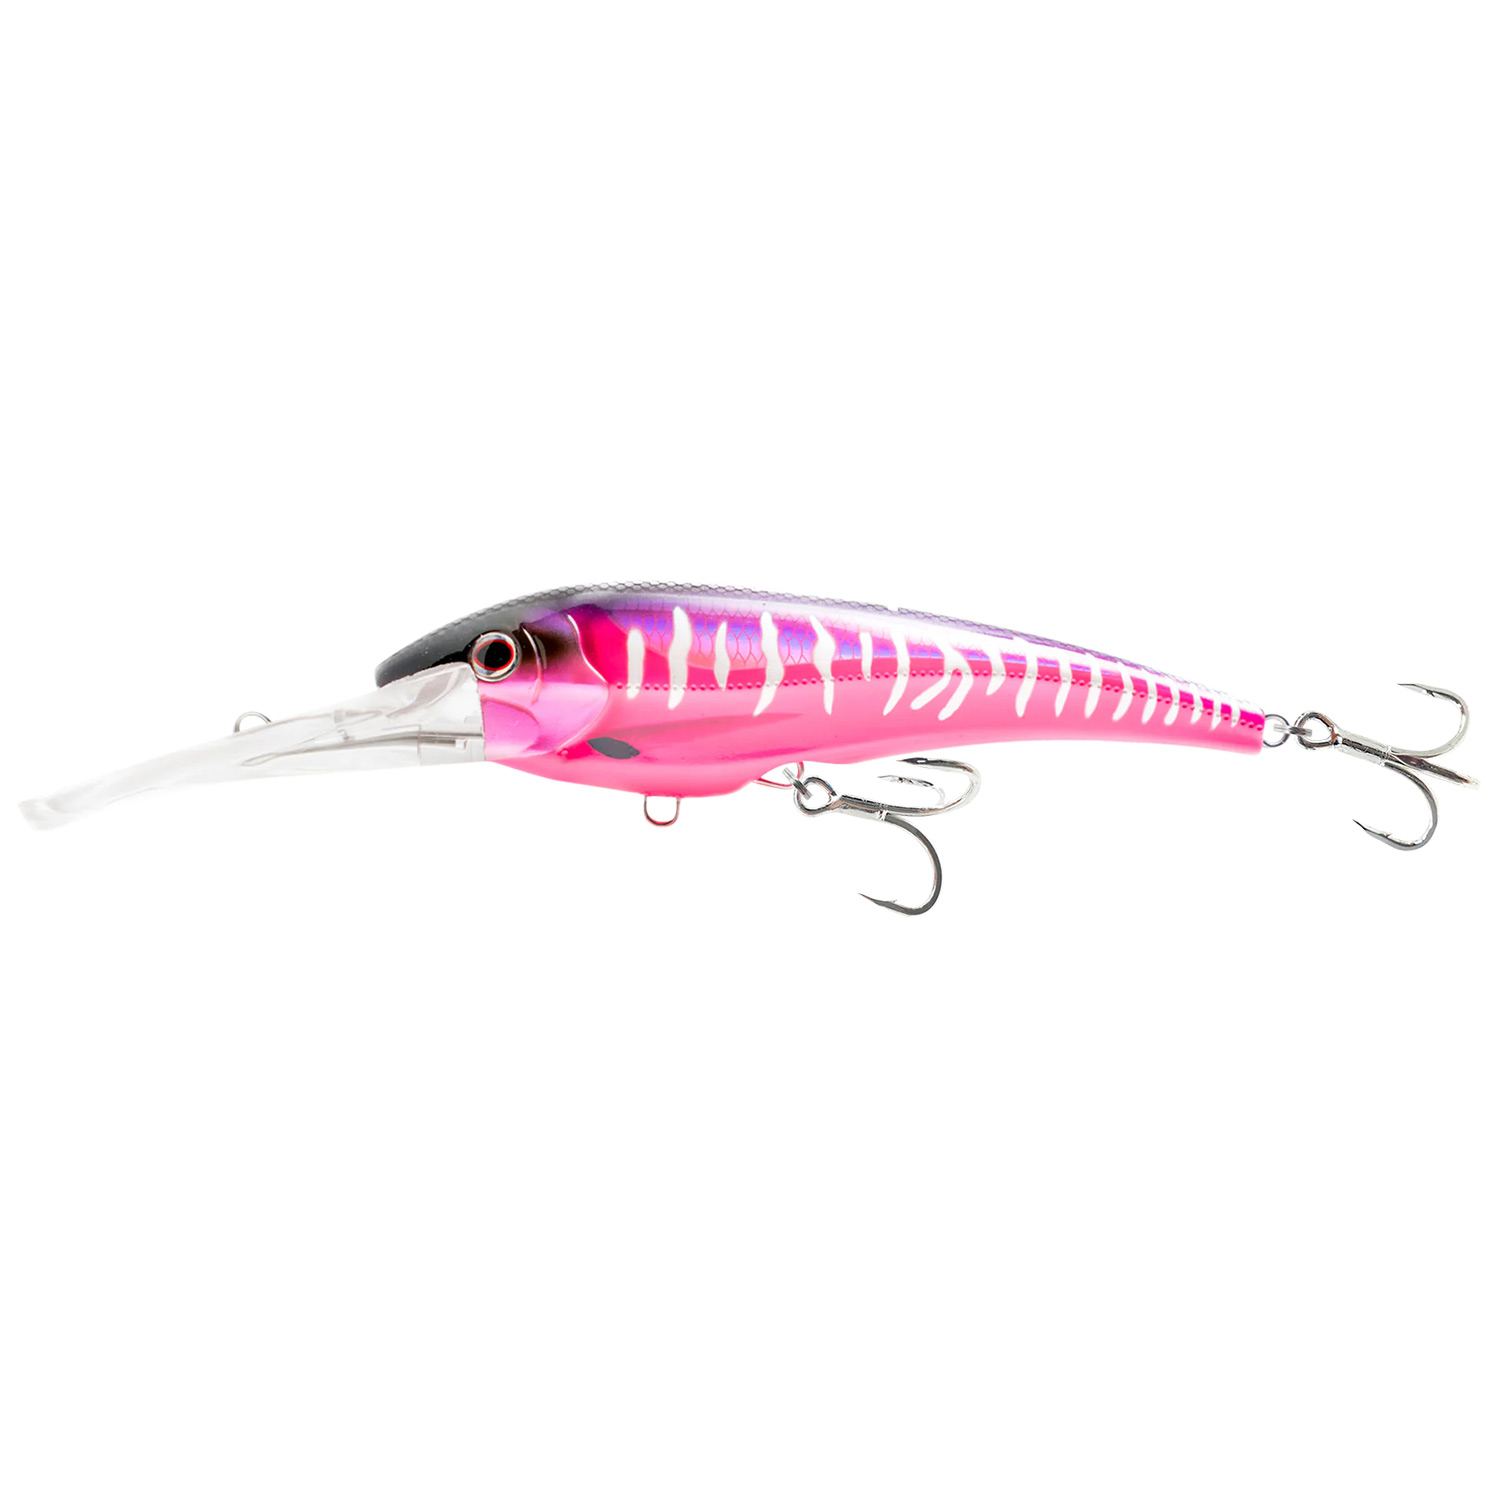 NOMAD DESIGN 5 1/2 DTX Minnow Floating Trolling Lure, 1 3/4